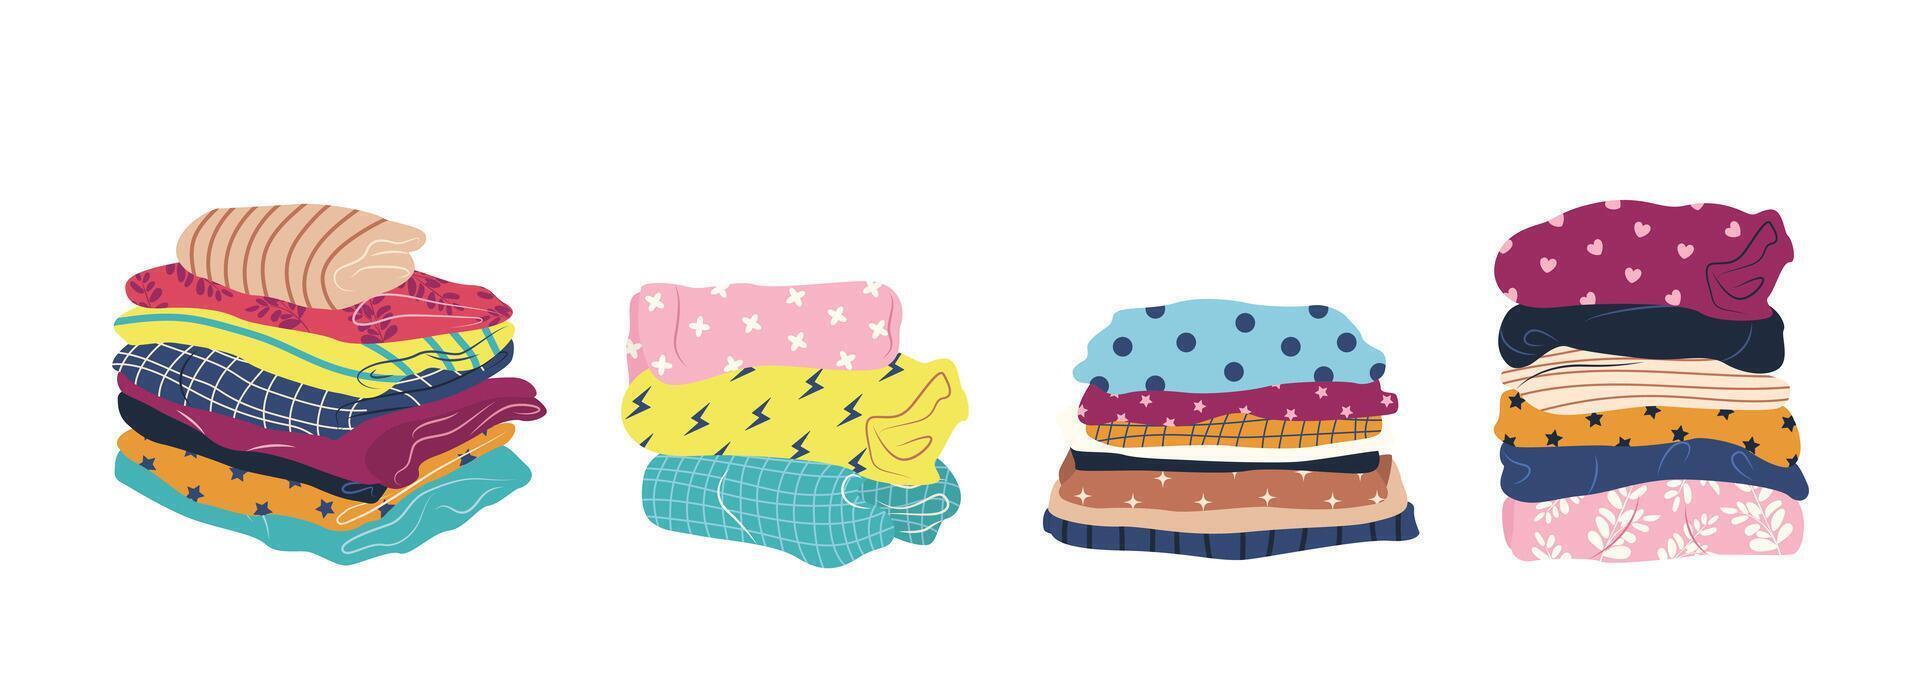 Stack of clean and ironed items of clothing. Set of folded multicolored clothes, apparel and garments, including sweaters, scarf, shirts, blanket. Isolated illustrations on a white background. vector